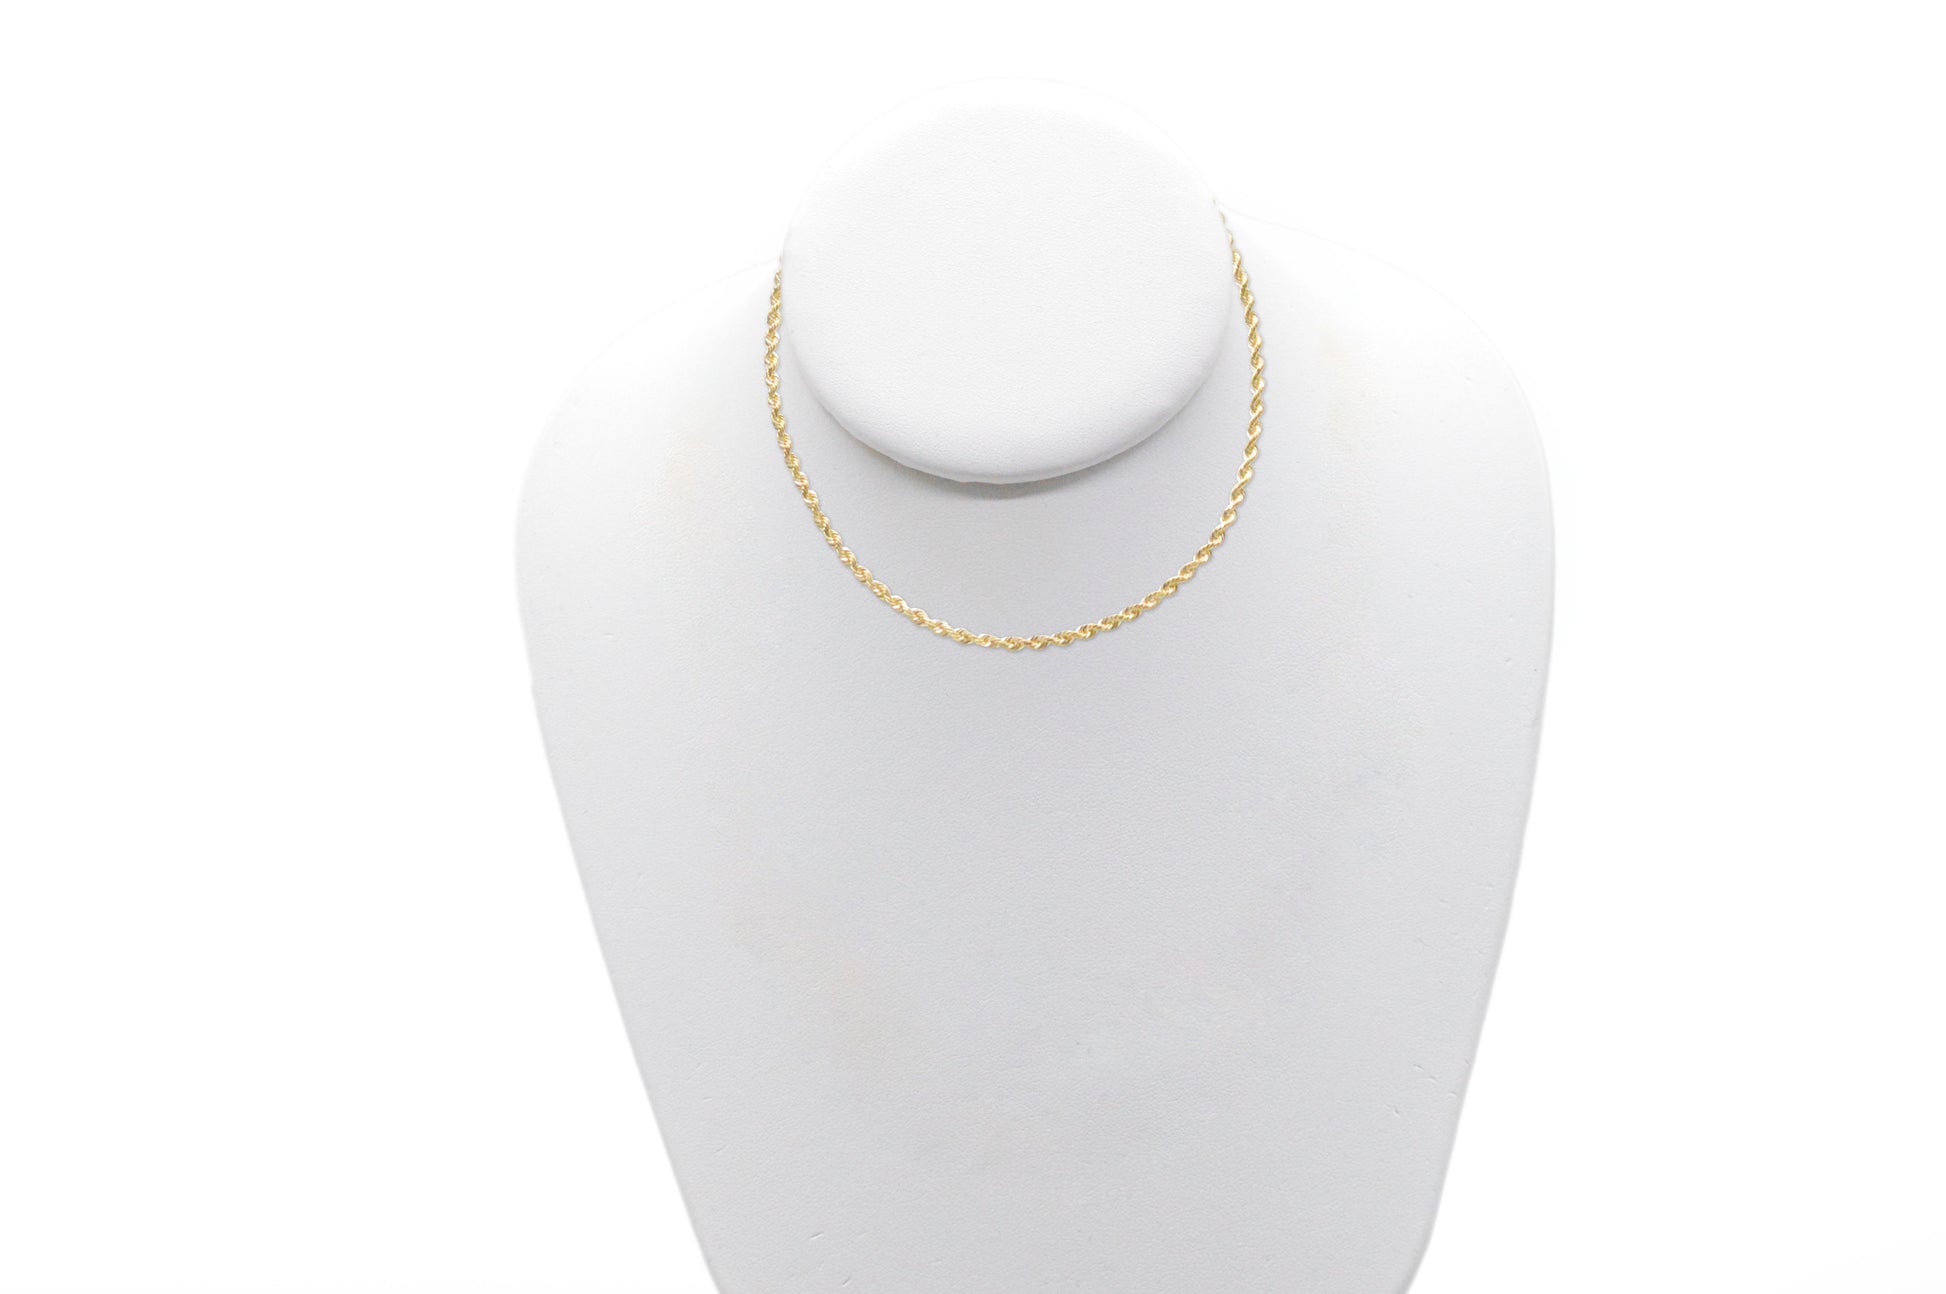 2.5mm Solid Gold Diamond Cut Rope Necklace Solid Gold Rope Chains